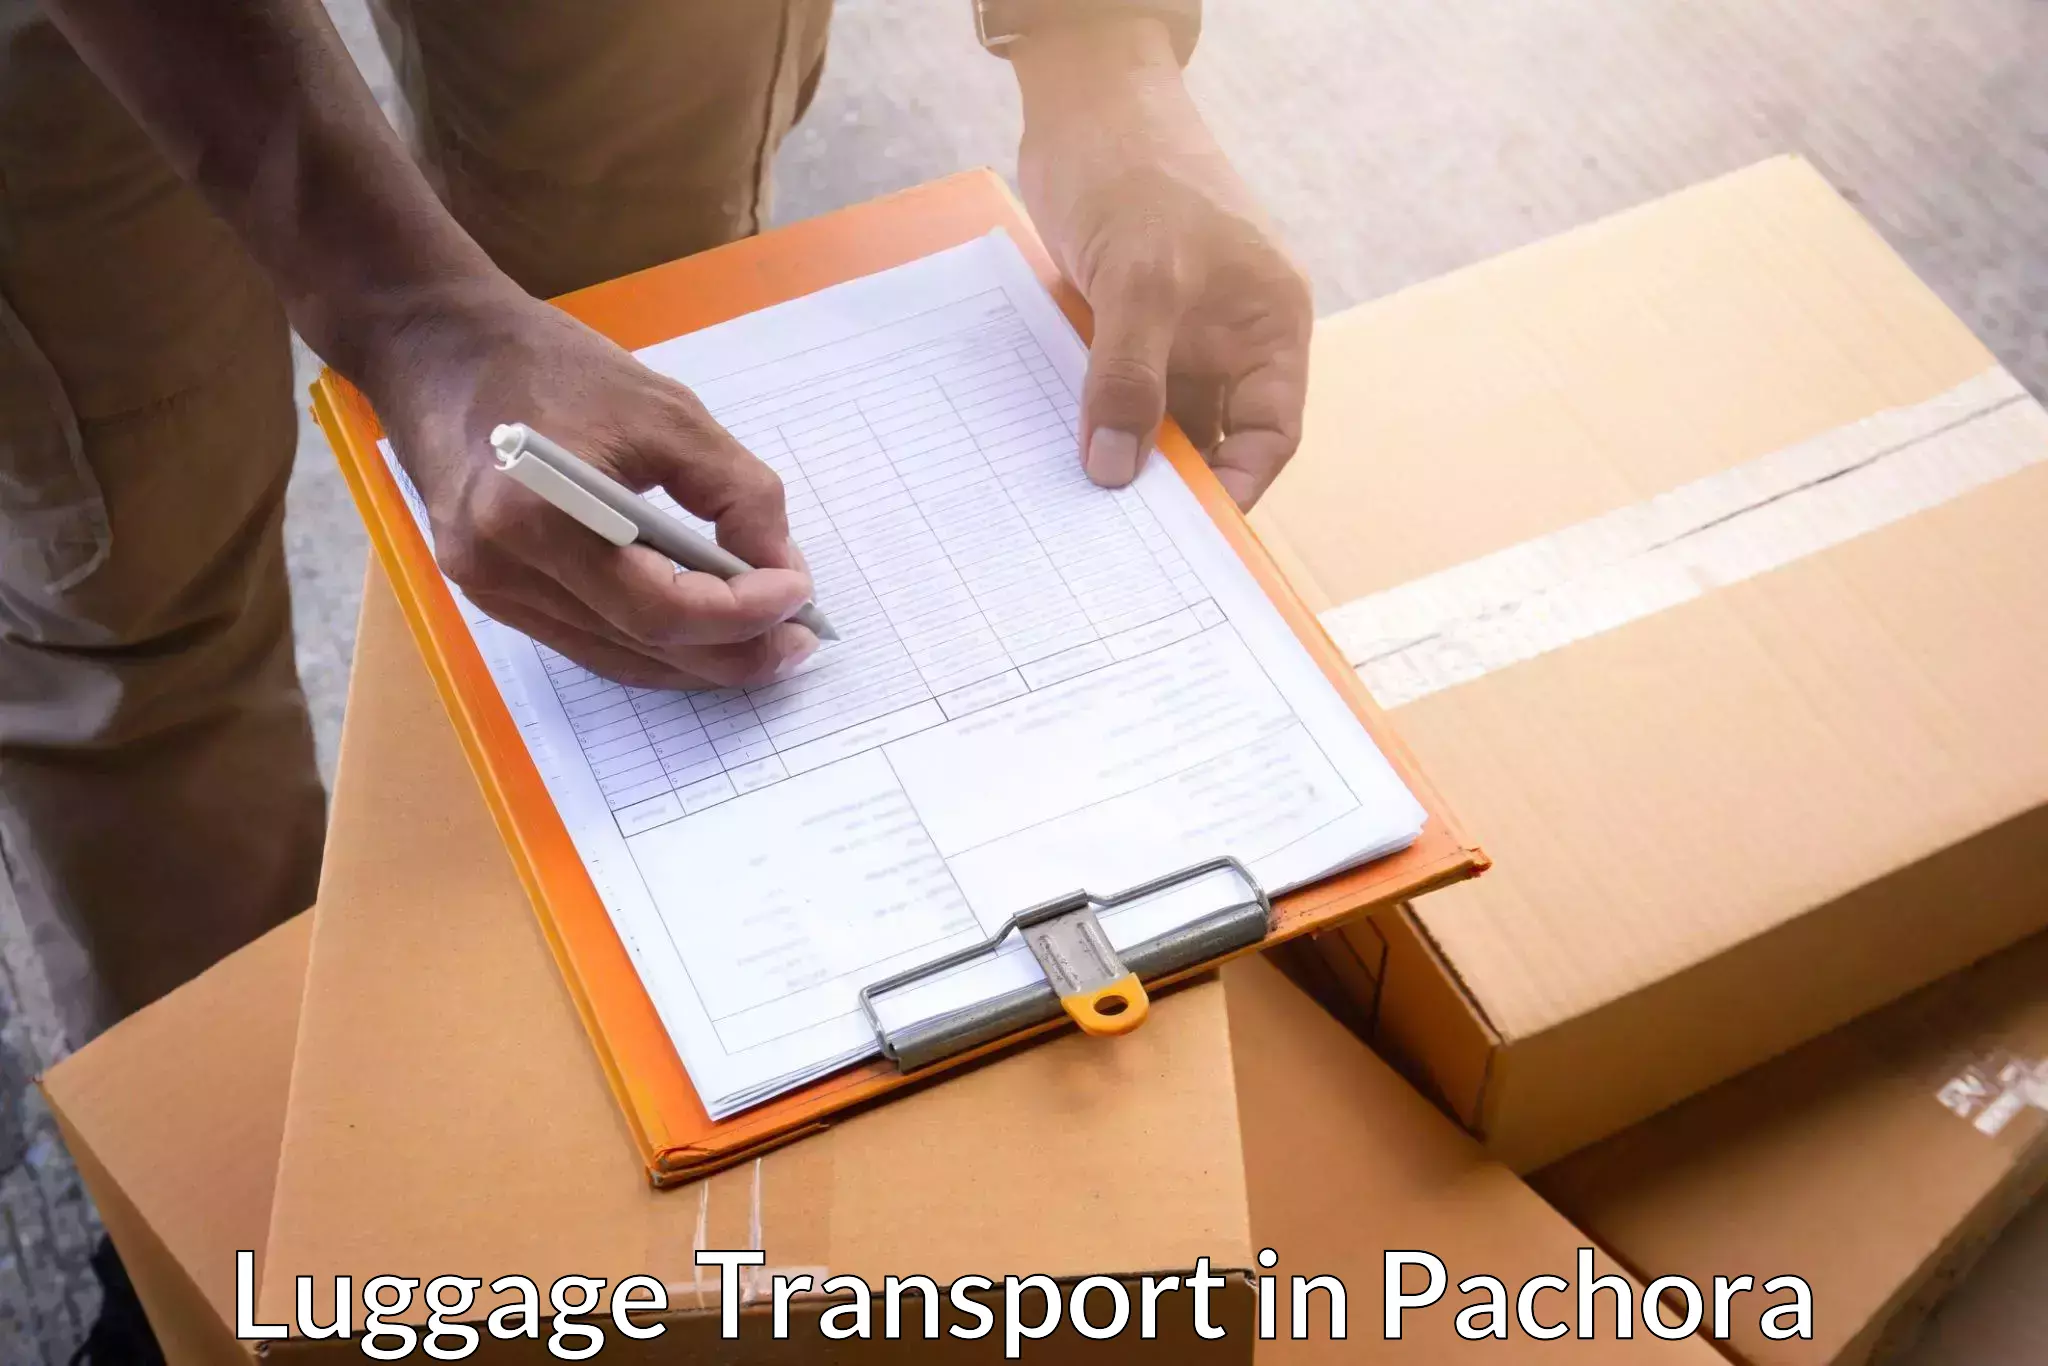 Baggage transport management in Pachora